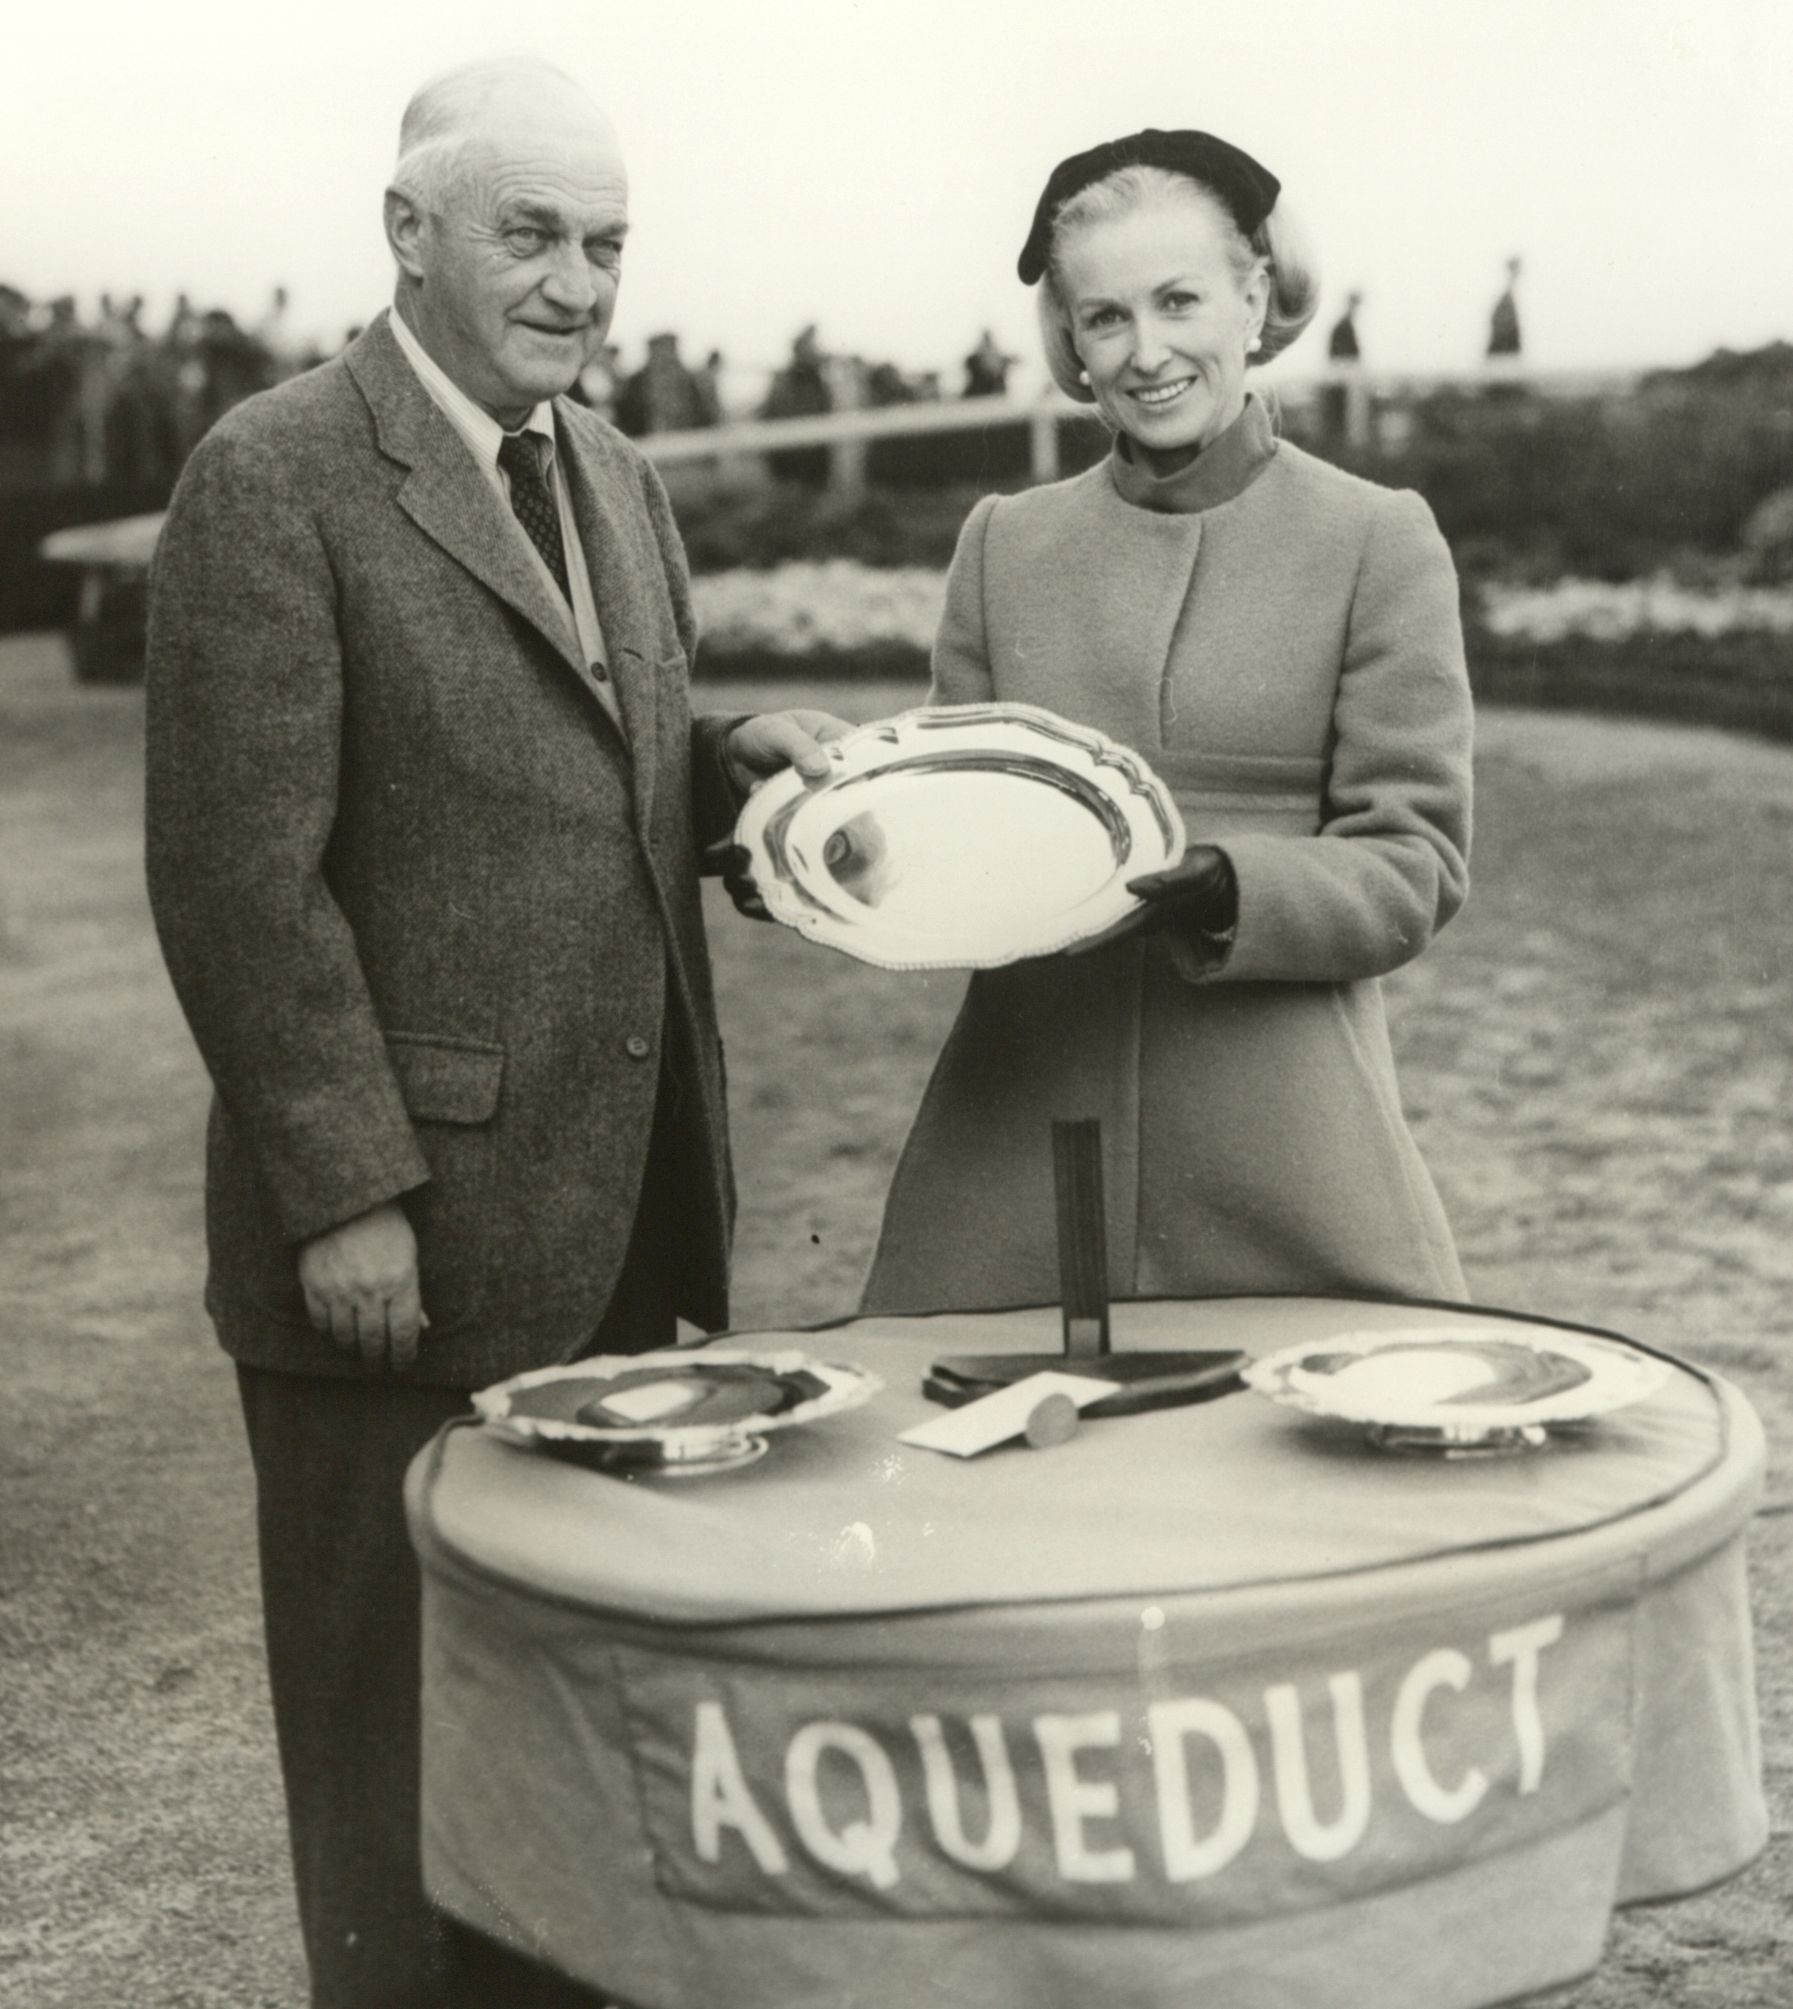 Marylou Whitney and John M. Gaver at Aqueduct, 1967 (Keeneland Library Thoroughbred Times Collection)